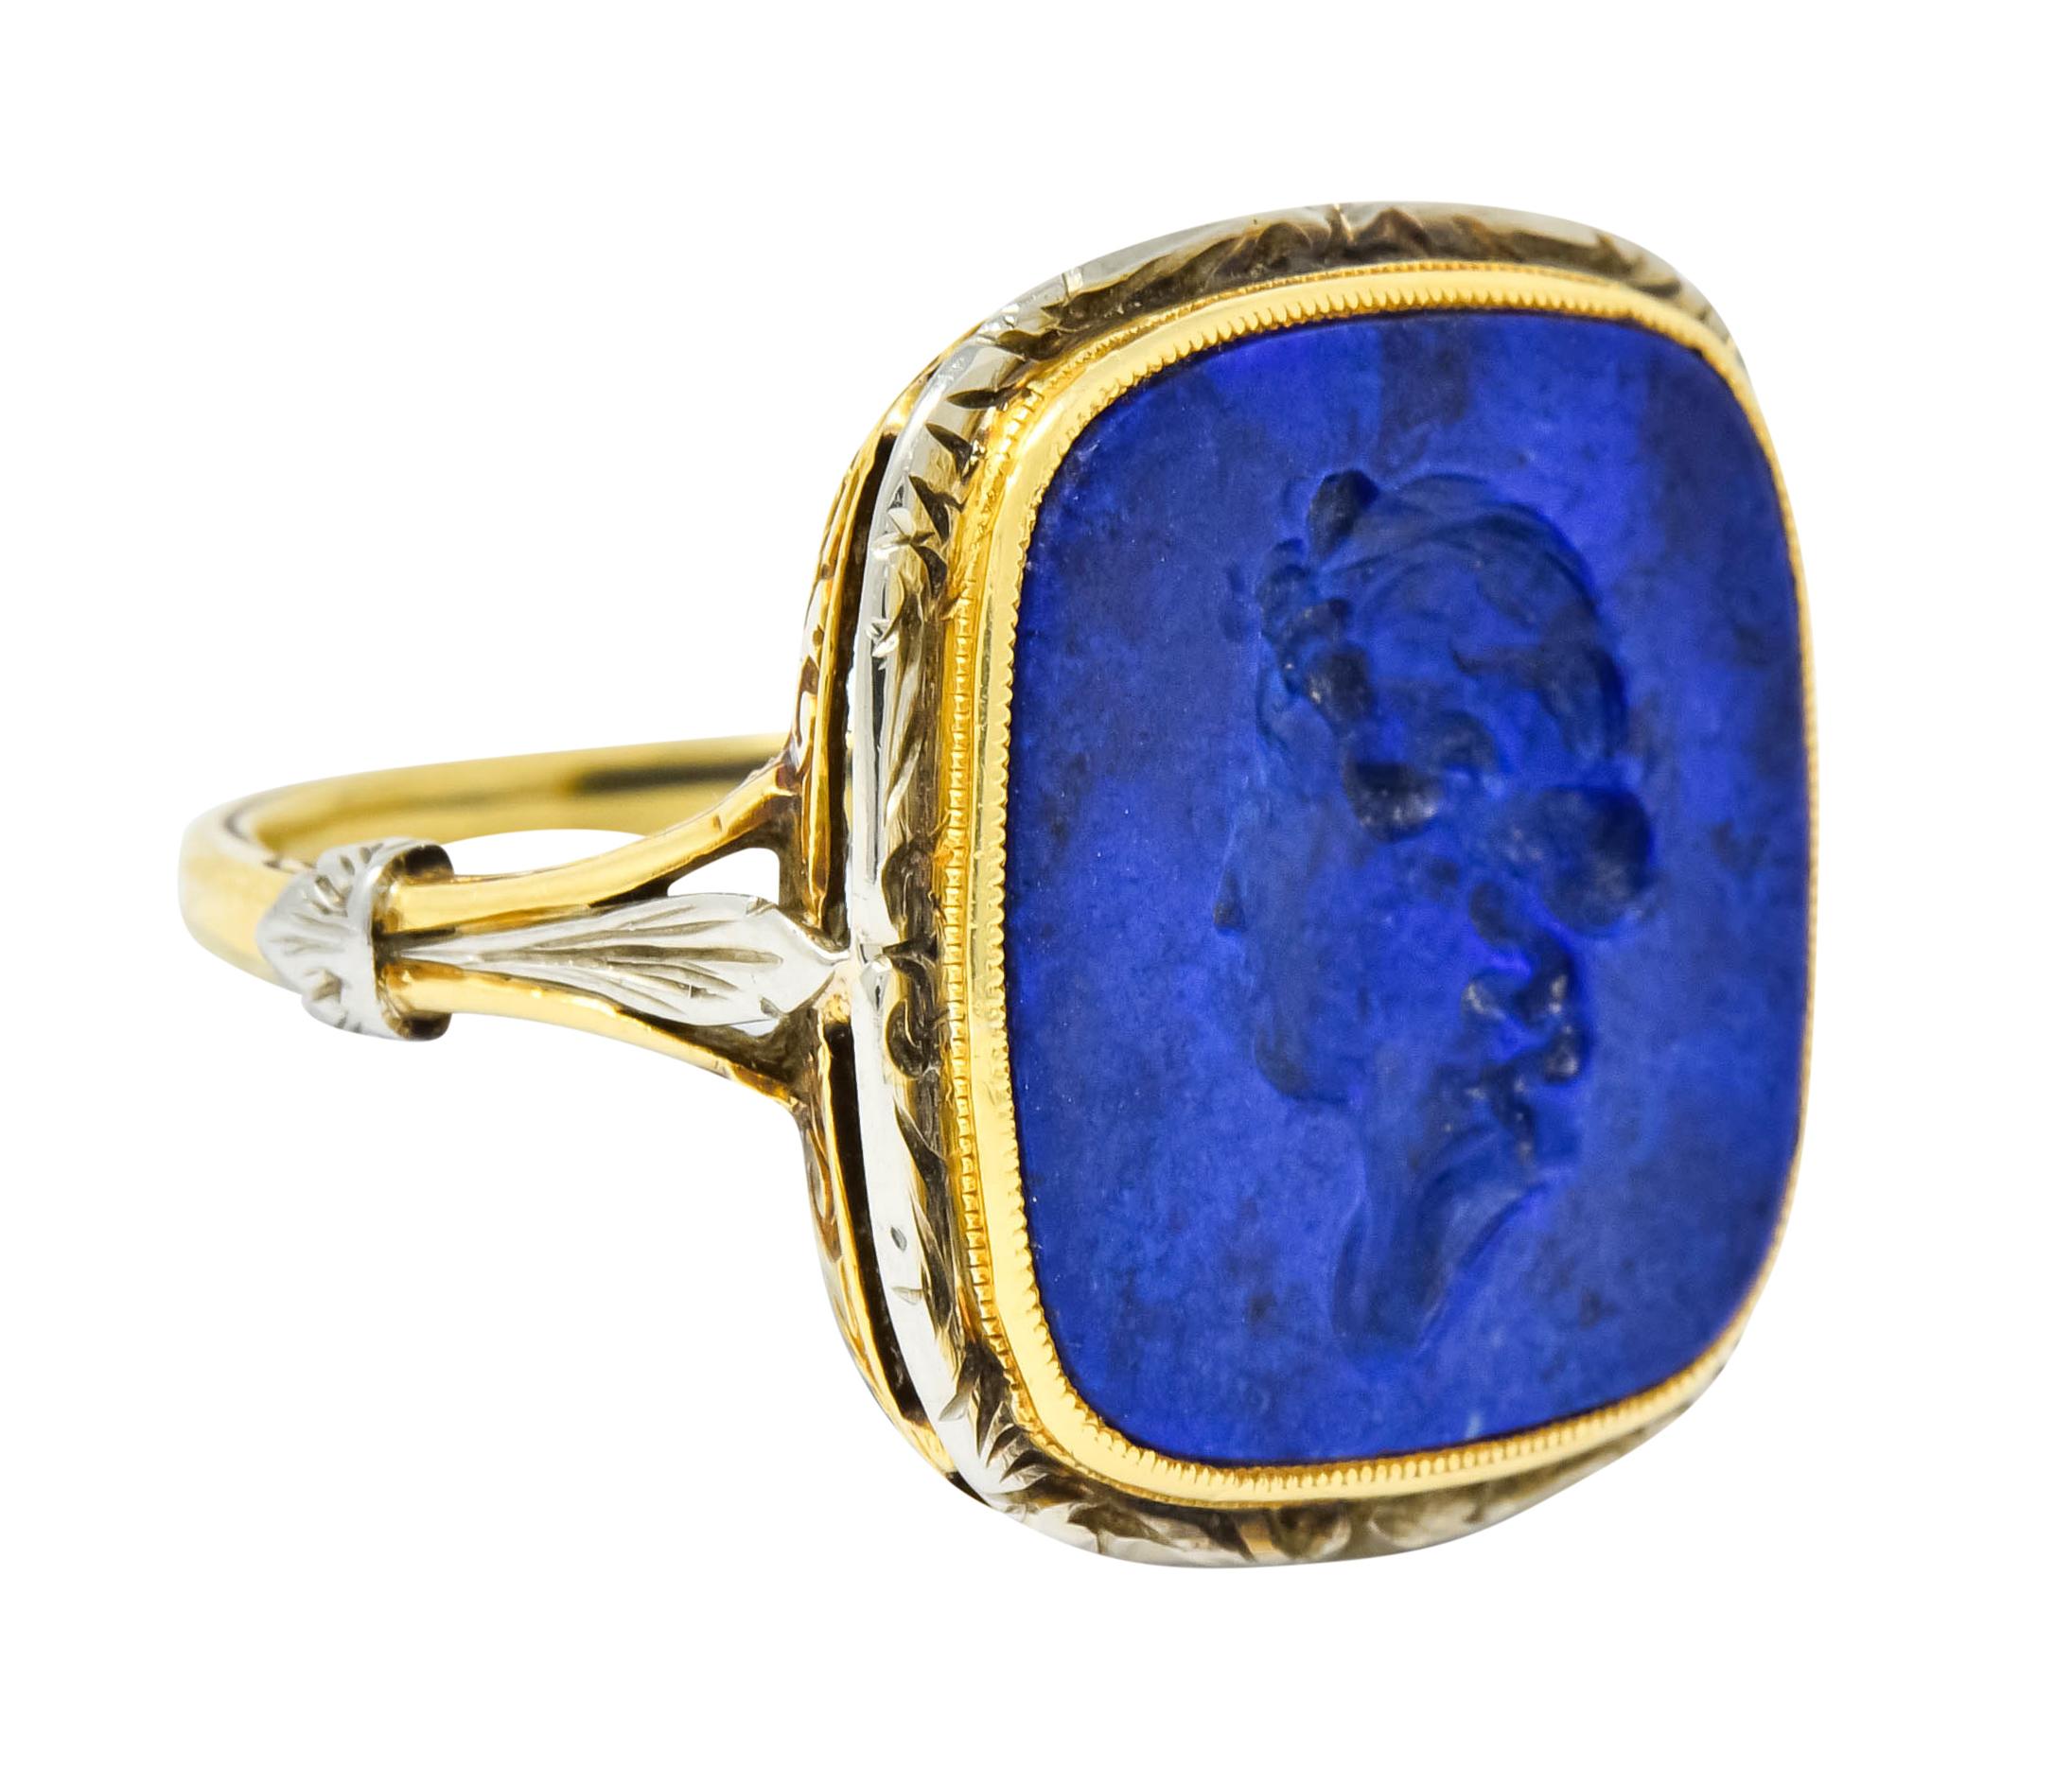 Centering a cushion cut lapis intaglio deeply engraved to depict the profile of a Grecian woman

Lapis is opaque with stunningly even ultramarine color

Bezel set in a milgrain gold surround offset by platinum foliate surround

With ornate foliate